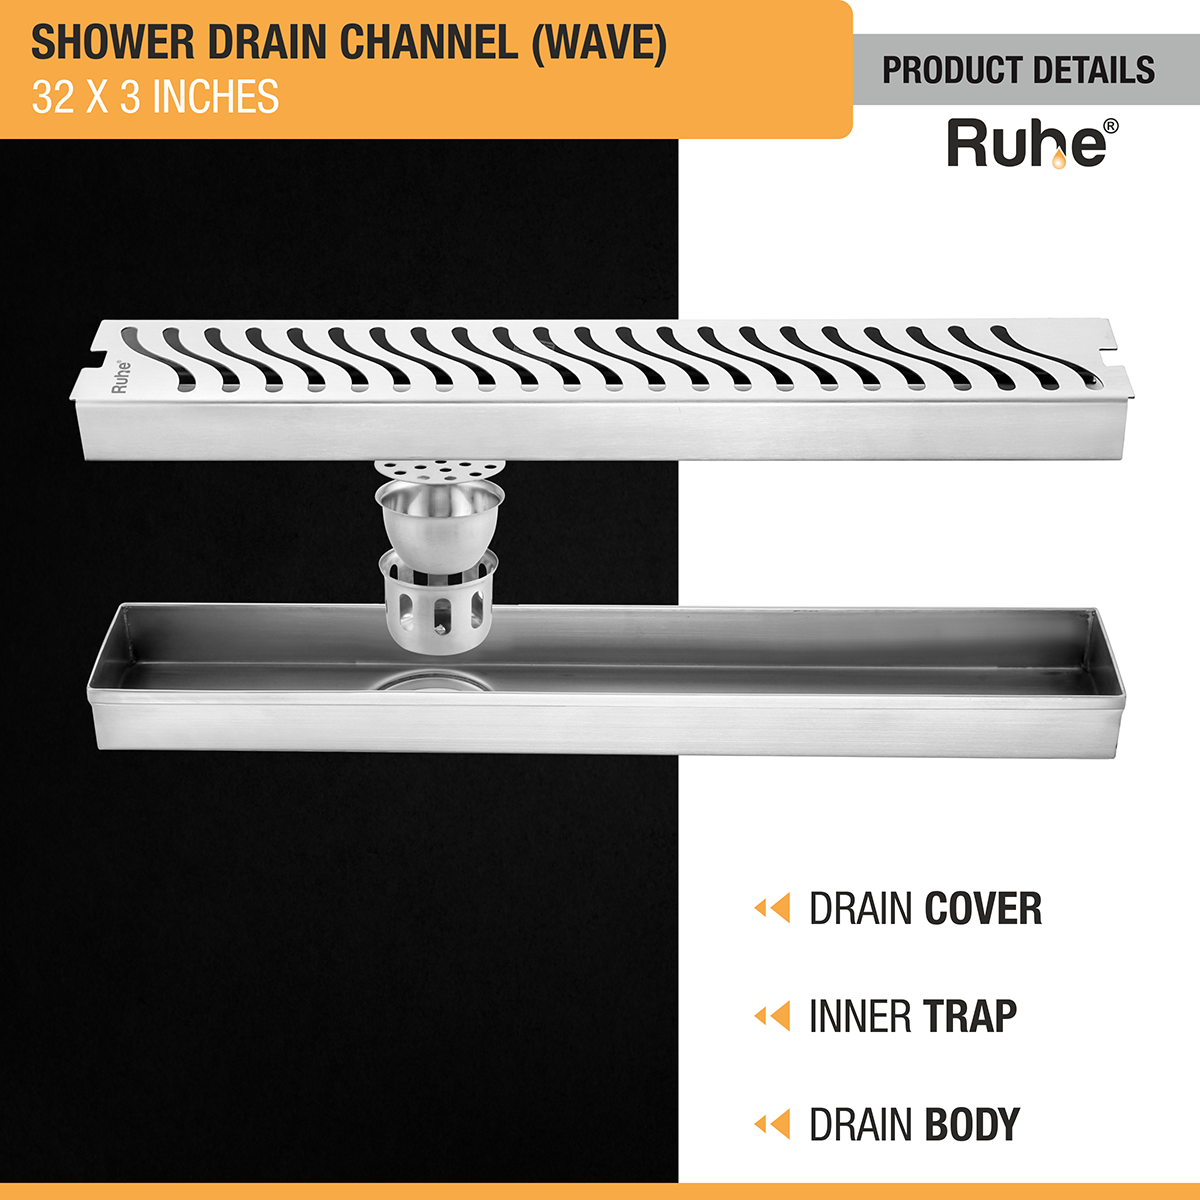 Wave Shower Drain Channel (32 X 3 Inches) with Cockroach Trap (304 Grade) product details